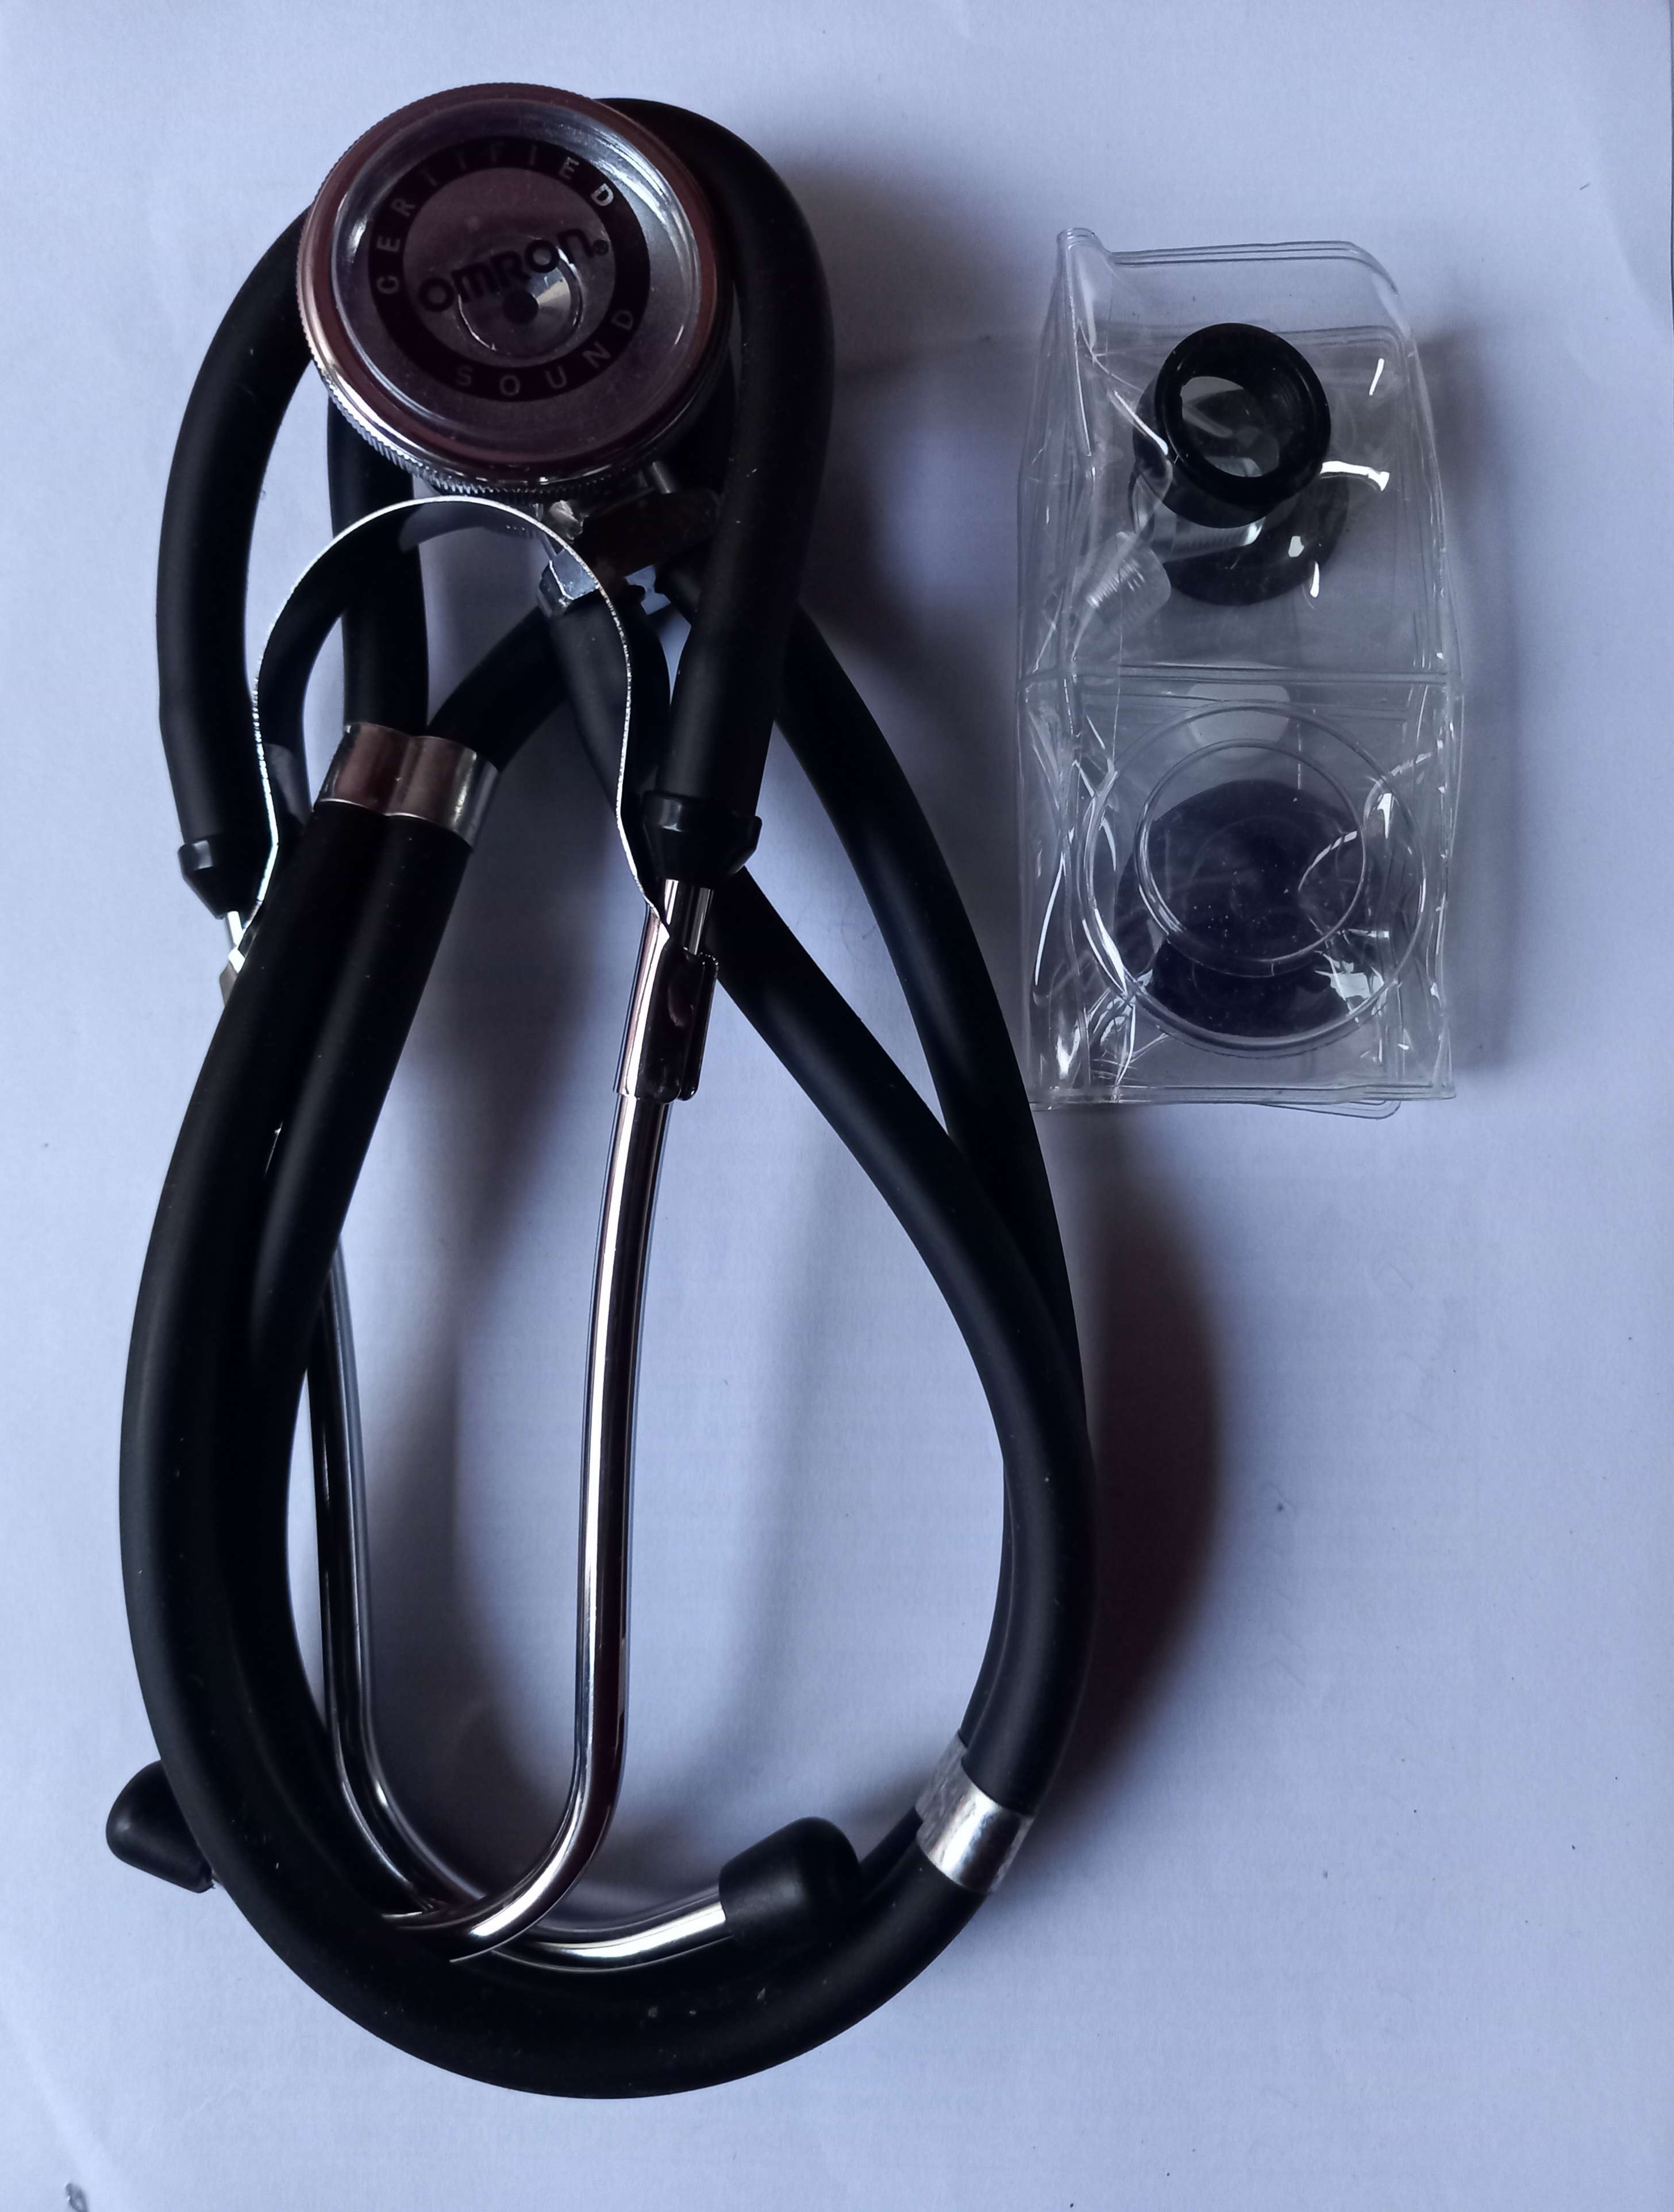 Stethoscope (Omron Professional Series)